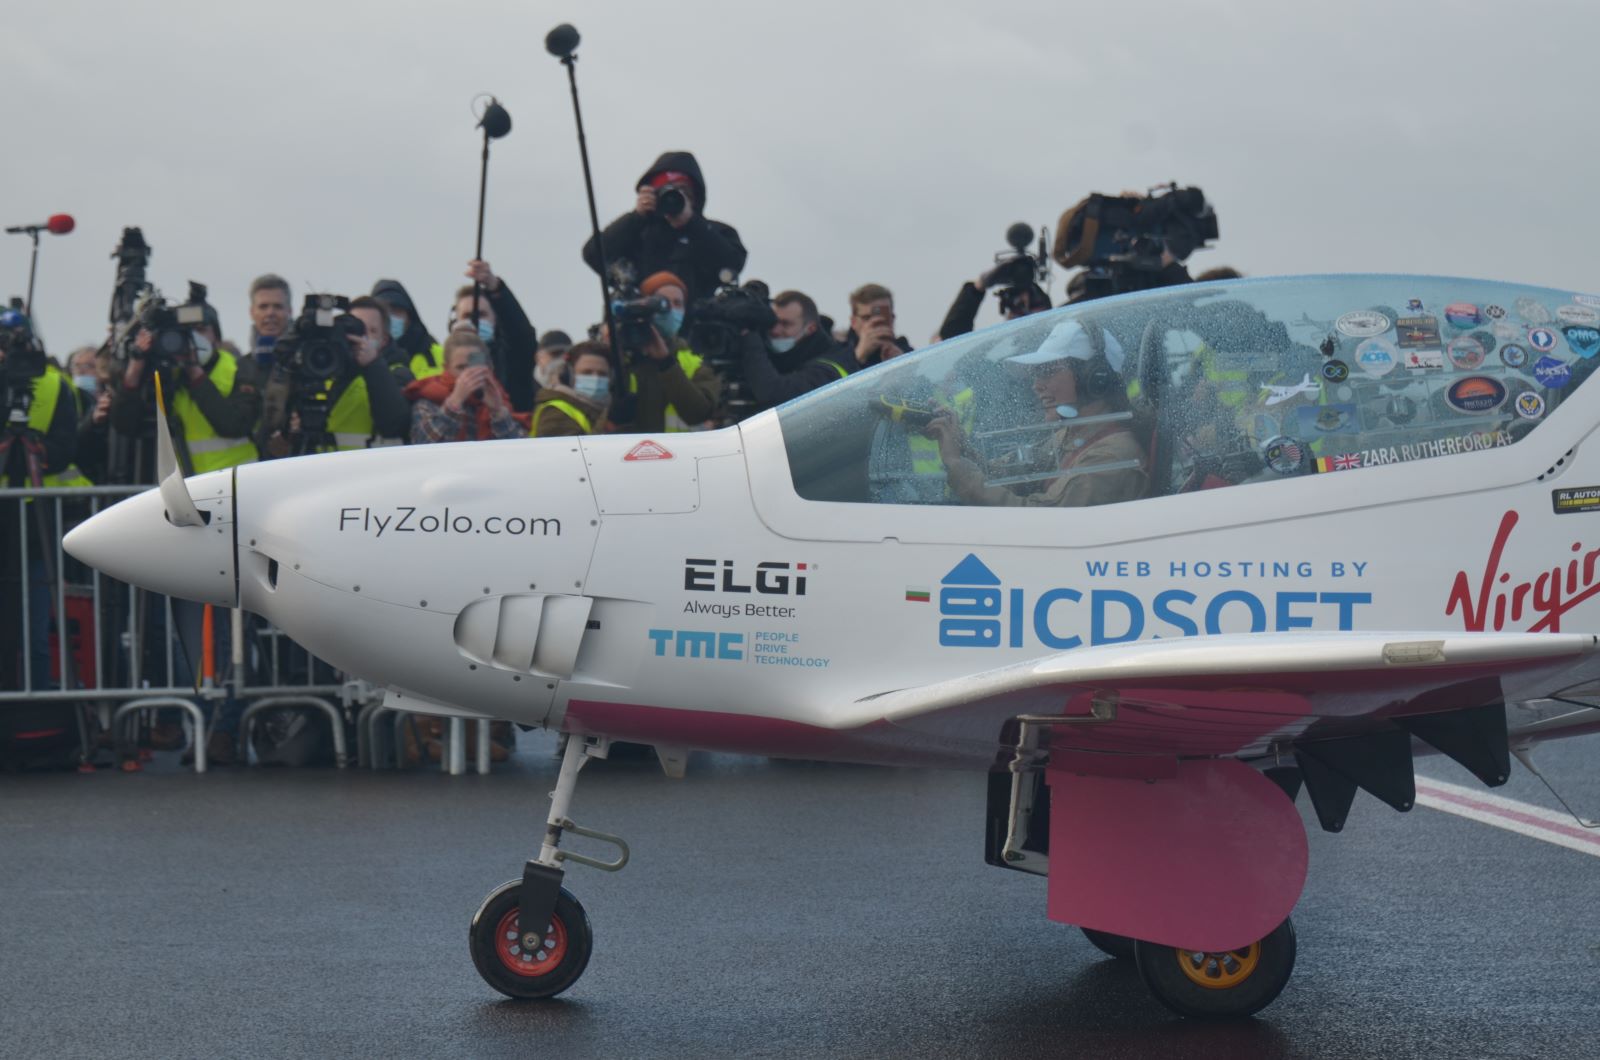 Zara Rutherford (19) becomes youngest woman to fly solo around the world. Kortrijk-Wevelgem airport, Belgium. 20 Jan. 2022 (Beatrice de Smet, Flyzolo) 472